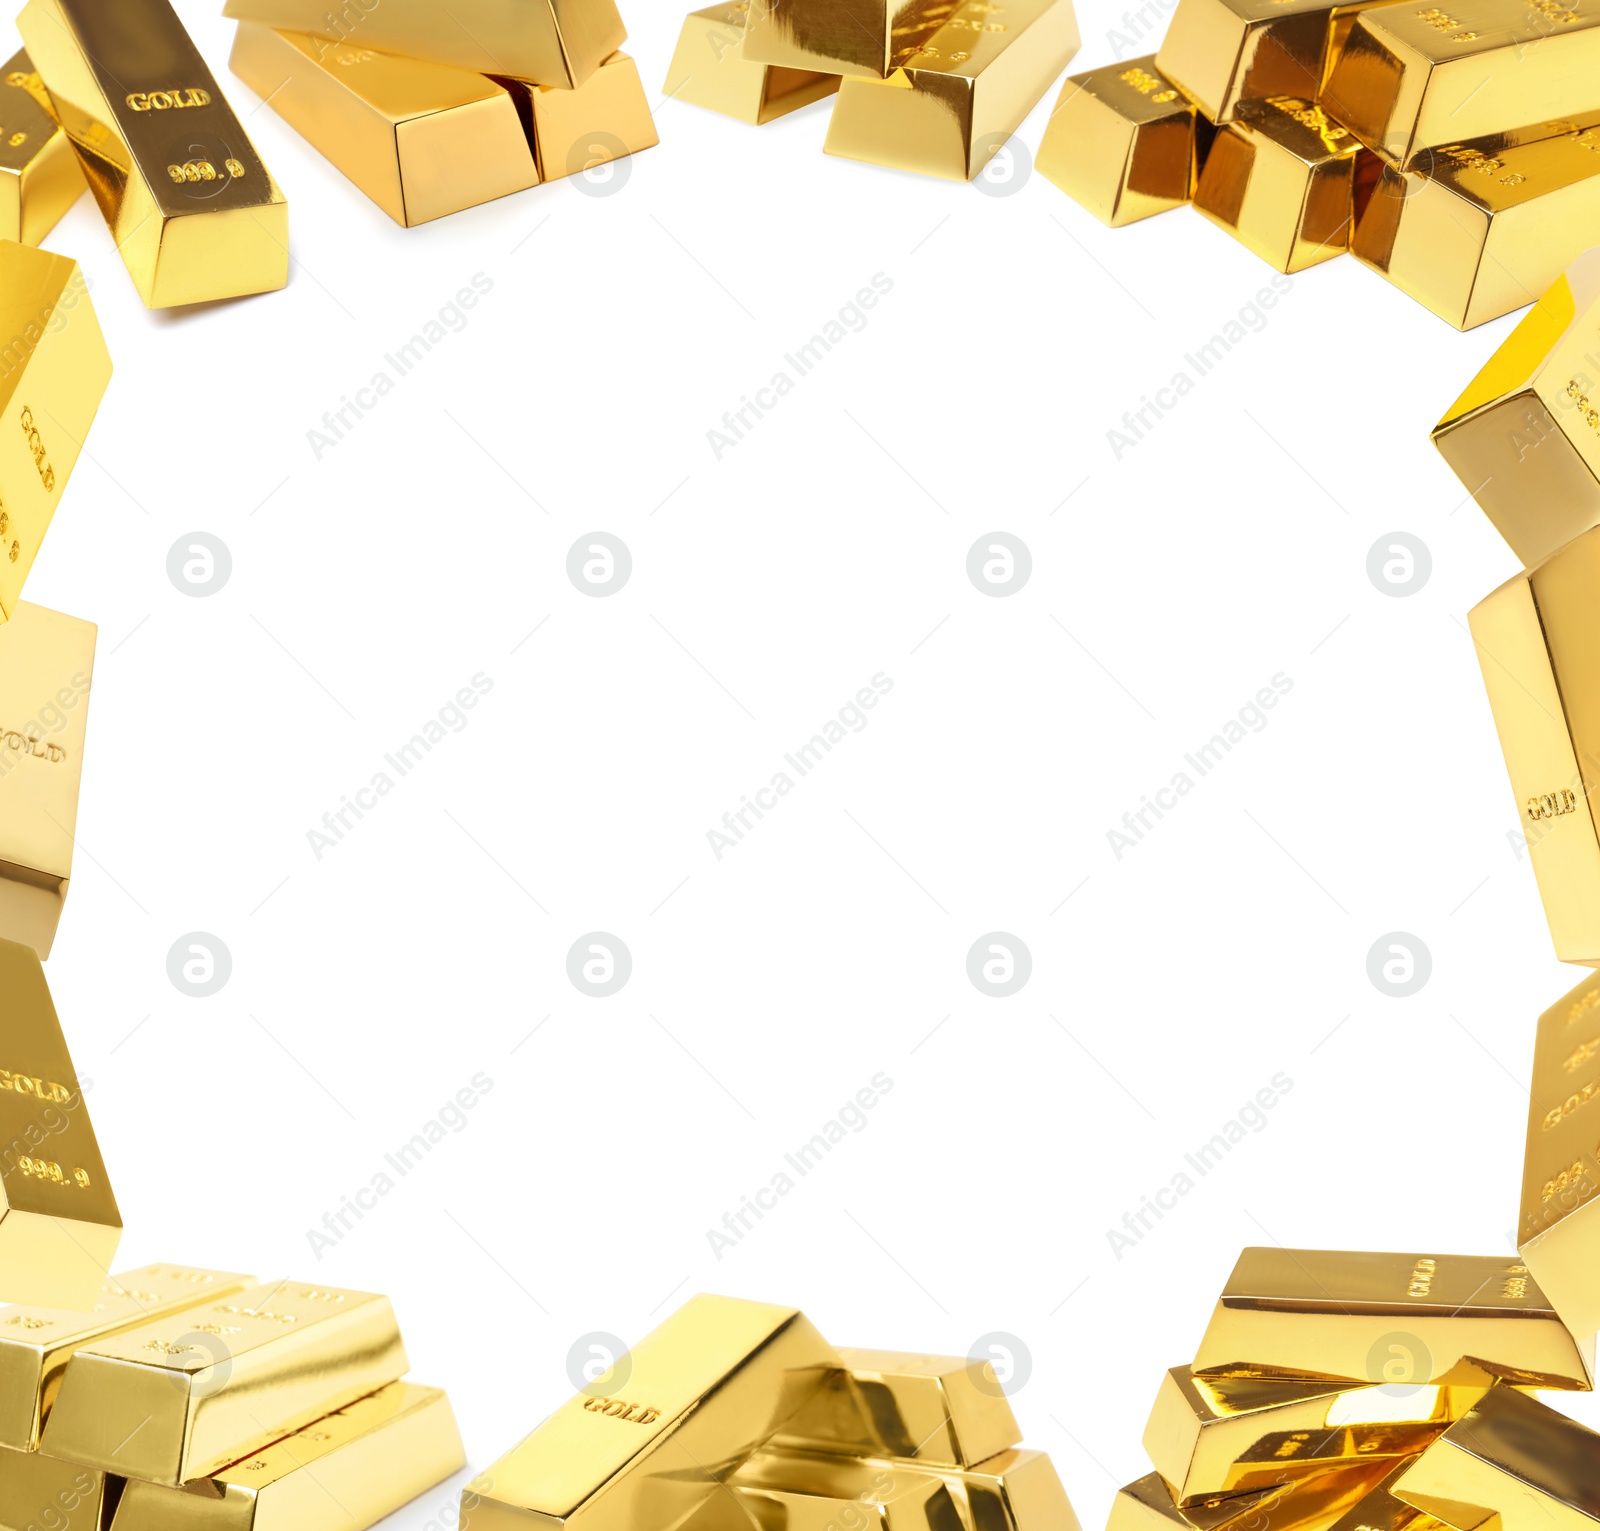 Image of Frame made of shiny gold bars on white background. Space for text